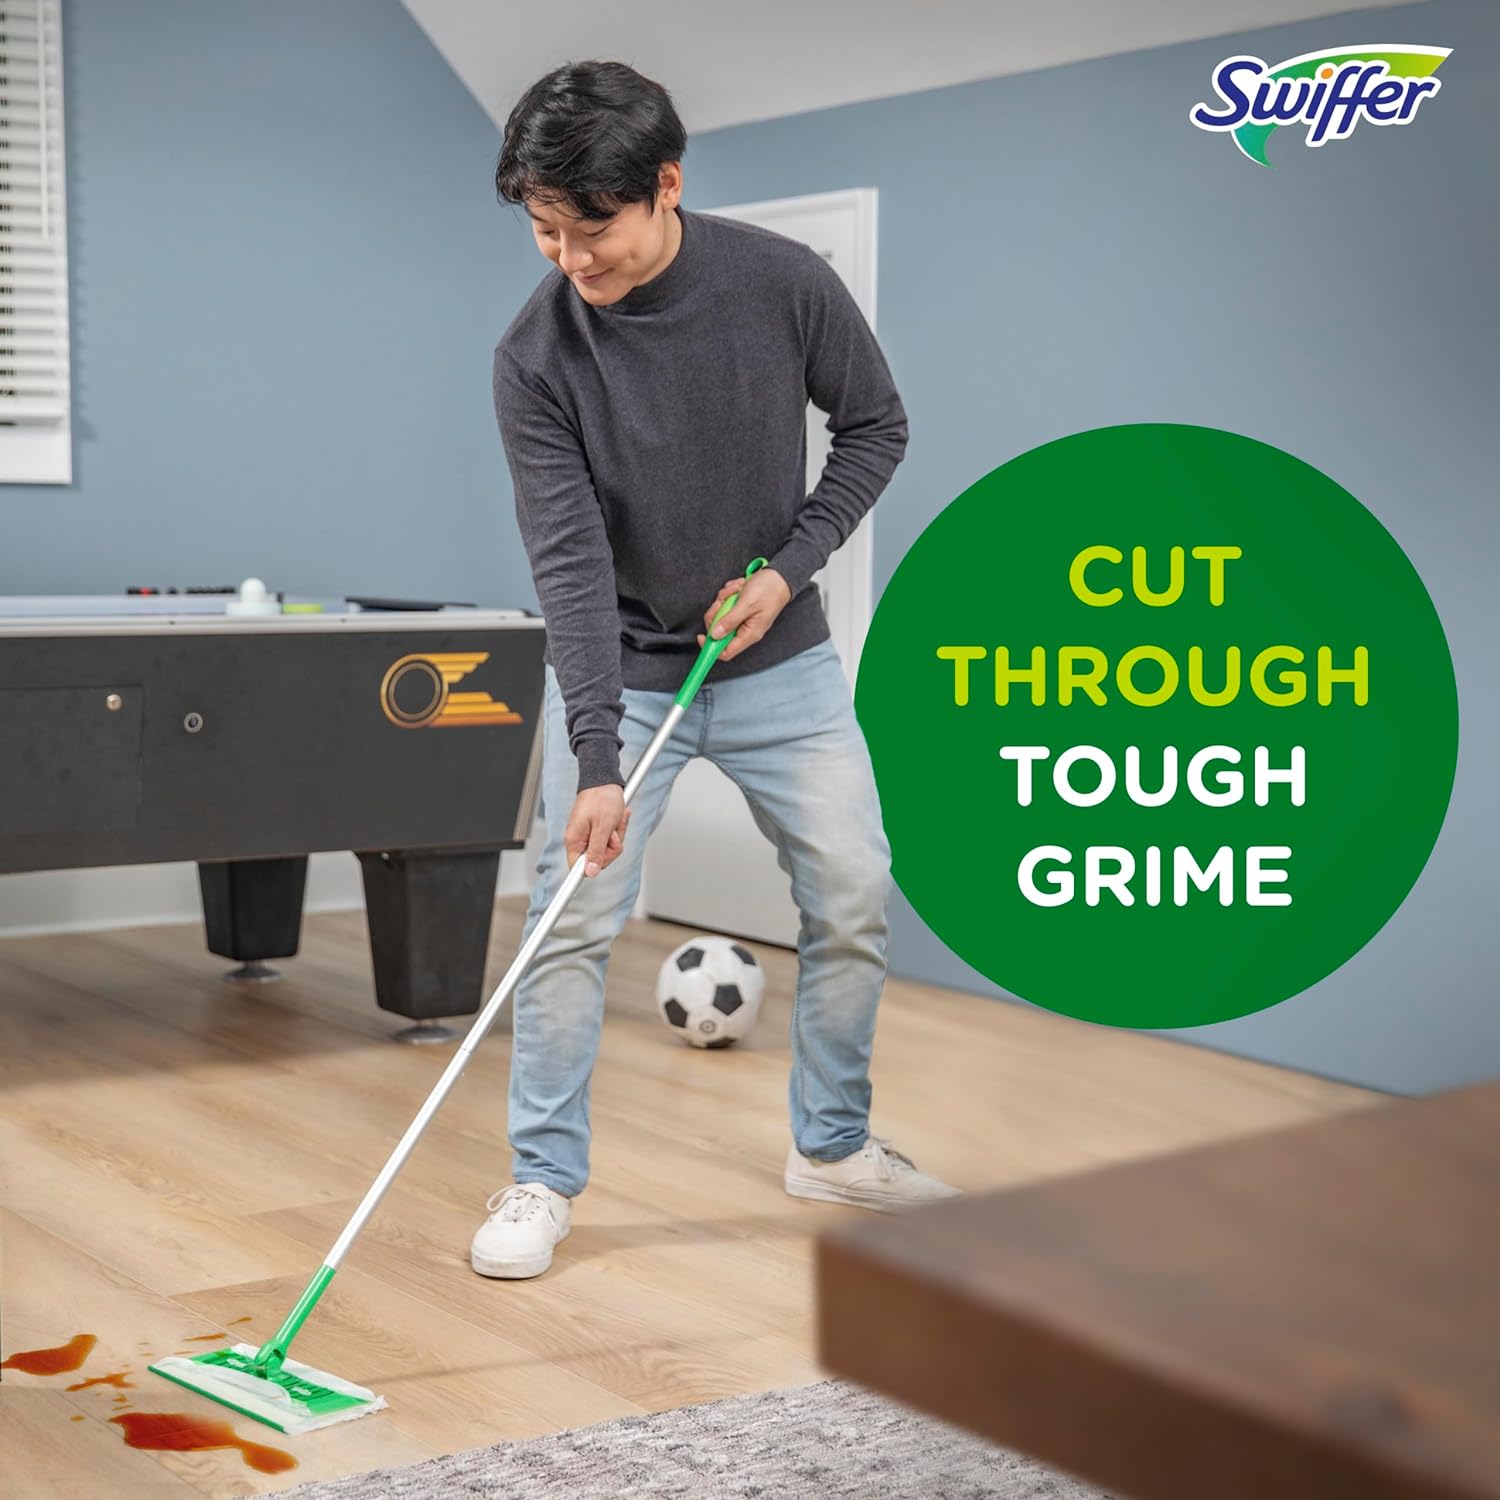 Swiffer Sweeper 2-in-1 Mops for Floor Cleaning, Dry and Wet Multi Surface Floor Cleaner, Sweeping and Mopping Starter Kit, Includes 1 Mop + 19 Refills, 20 Piece Set : Health & Household